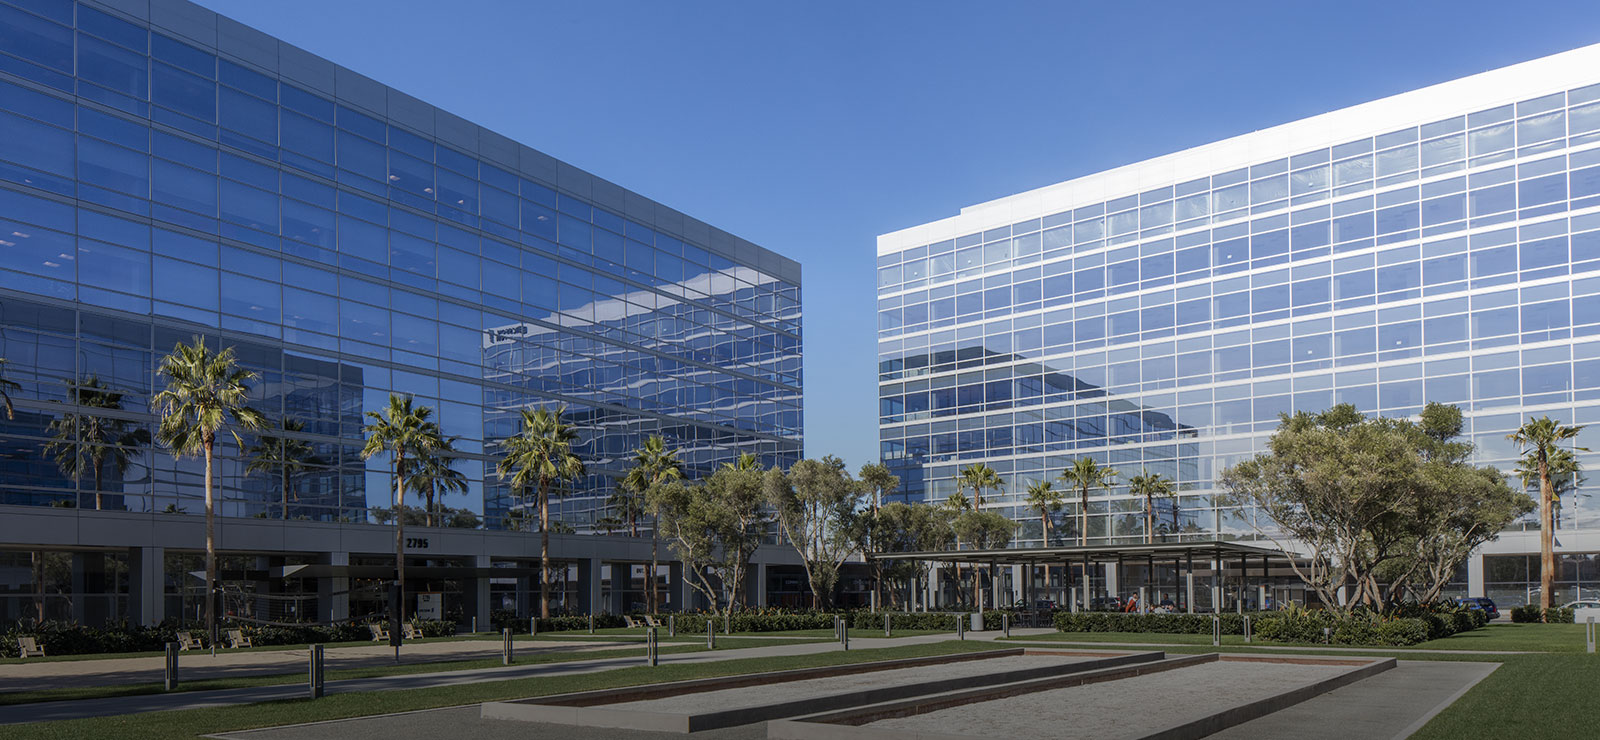 AMD Announces New State-of-the-Art Headquarters Building in Santa Clara |  Custom PC Review